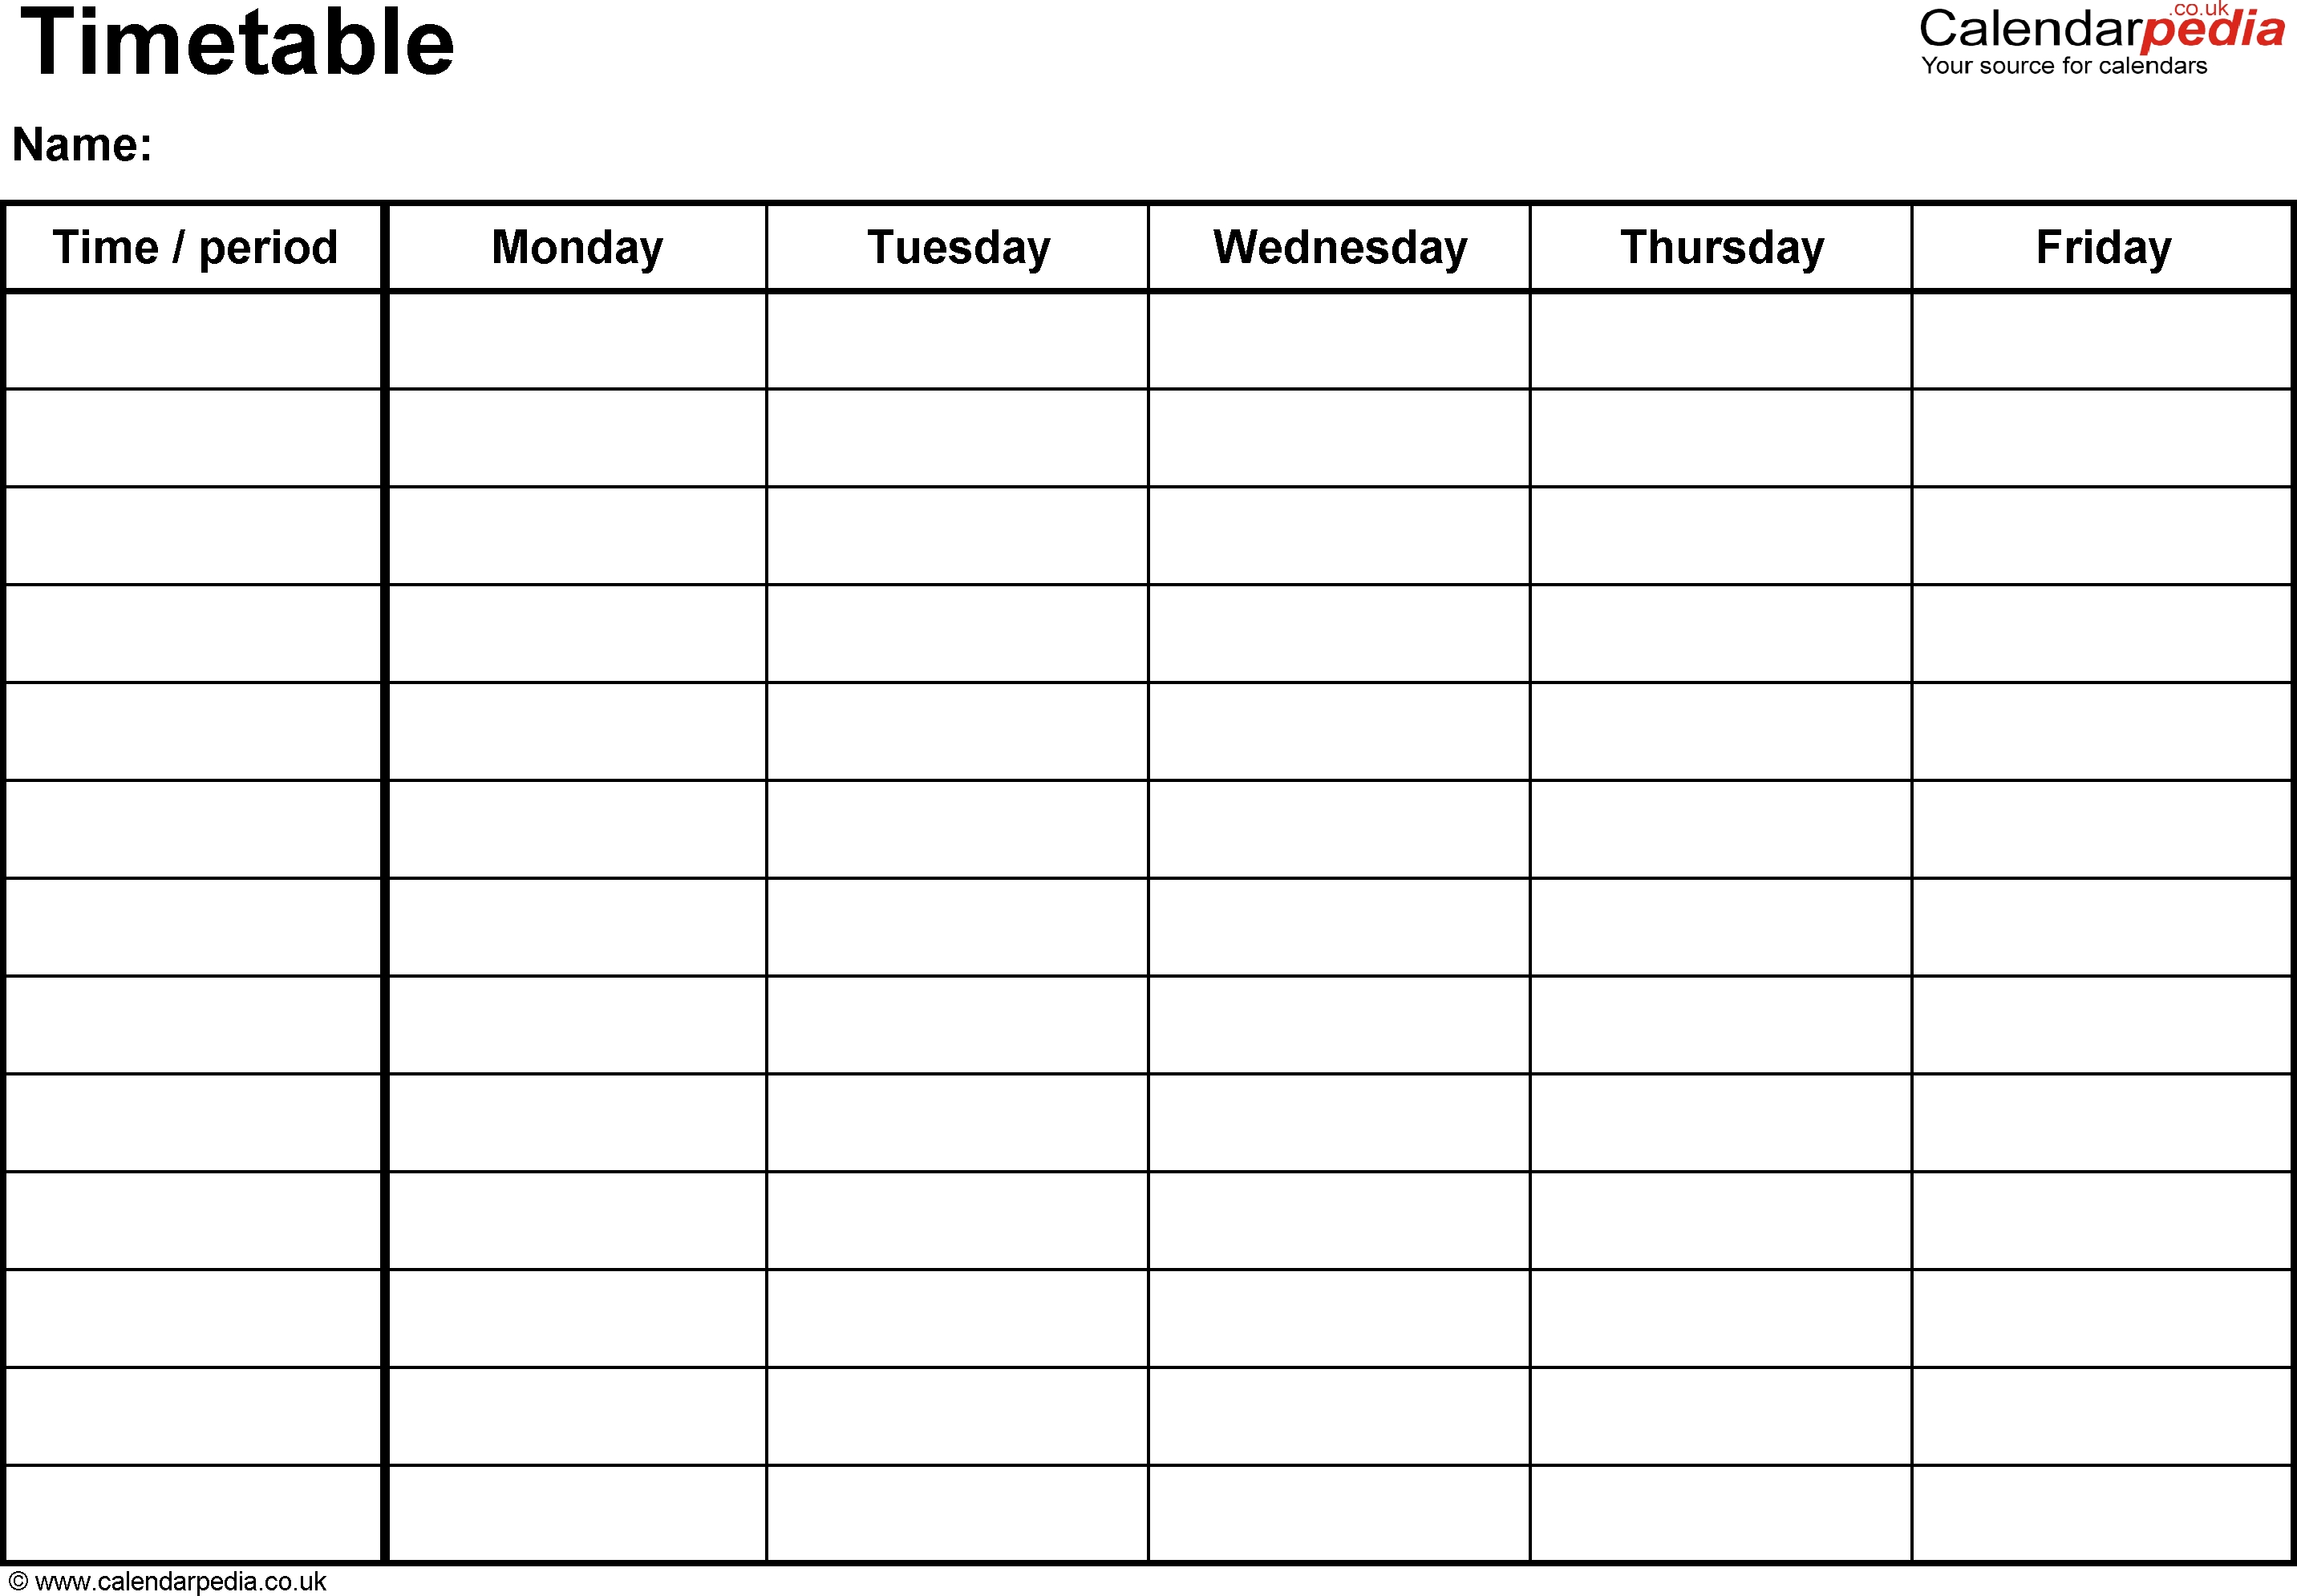 Timetables As Free Printable Templates For Microsoft Word for Printable Schedule 1 Week Editable